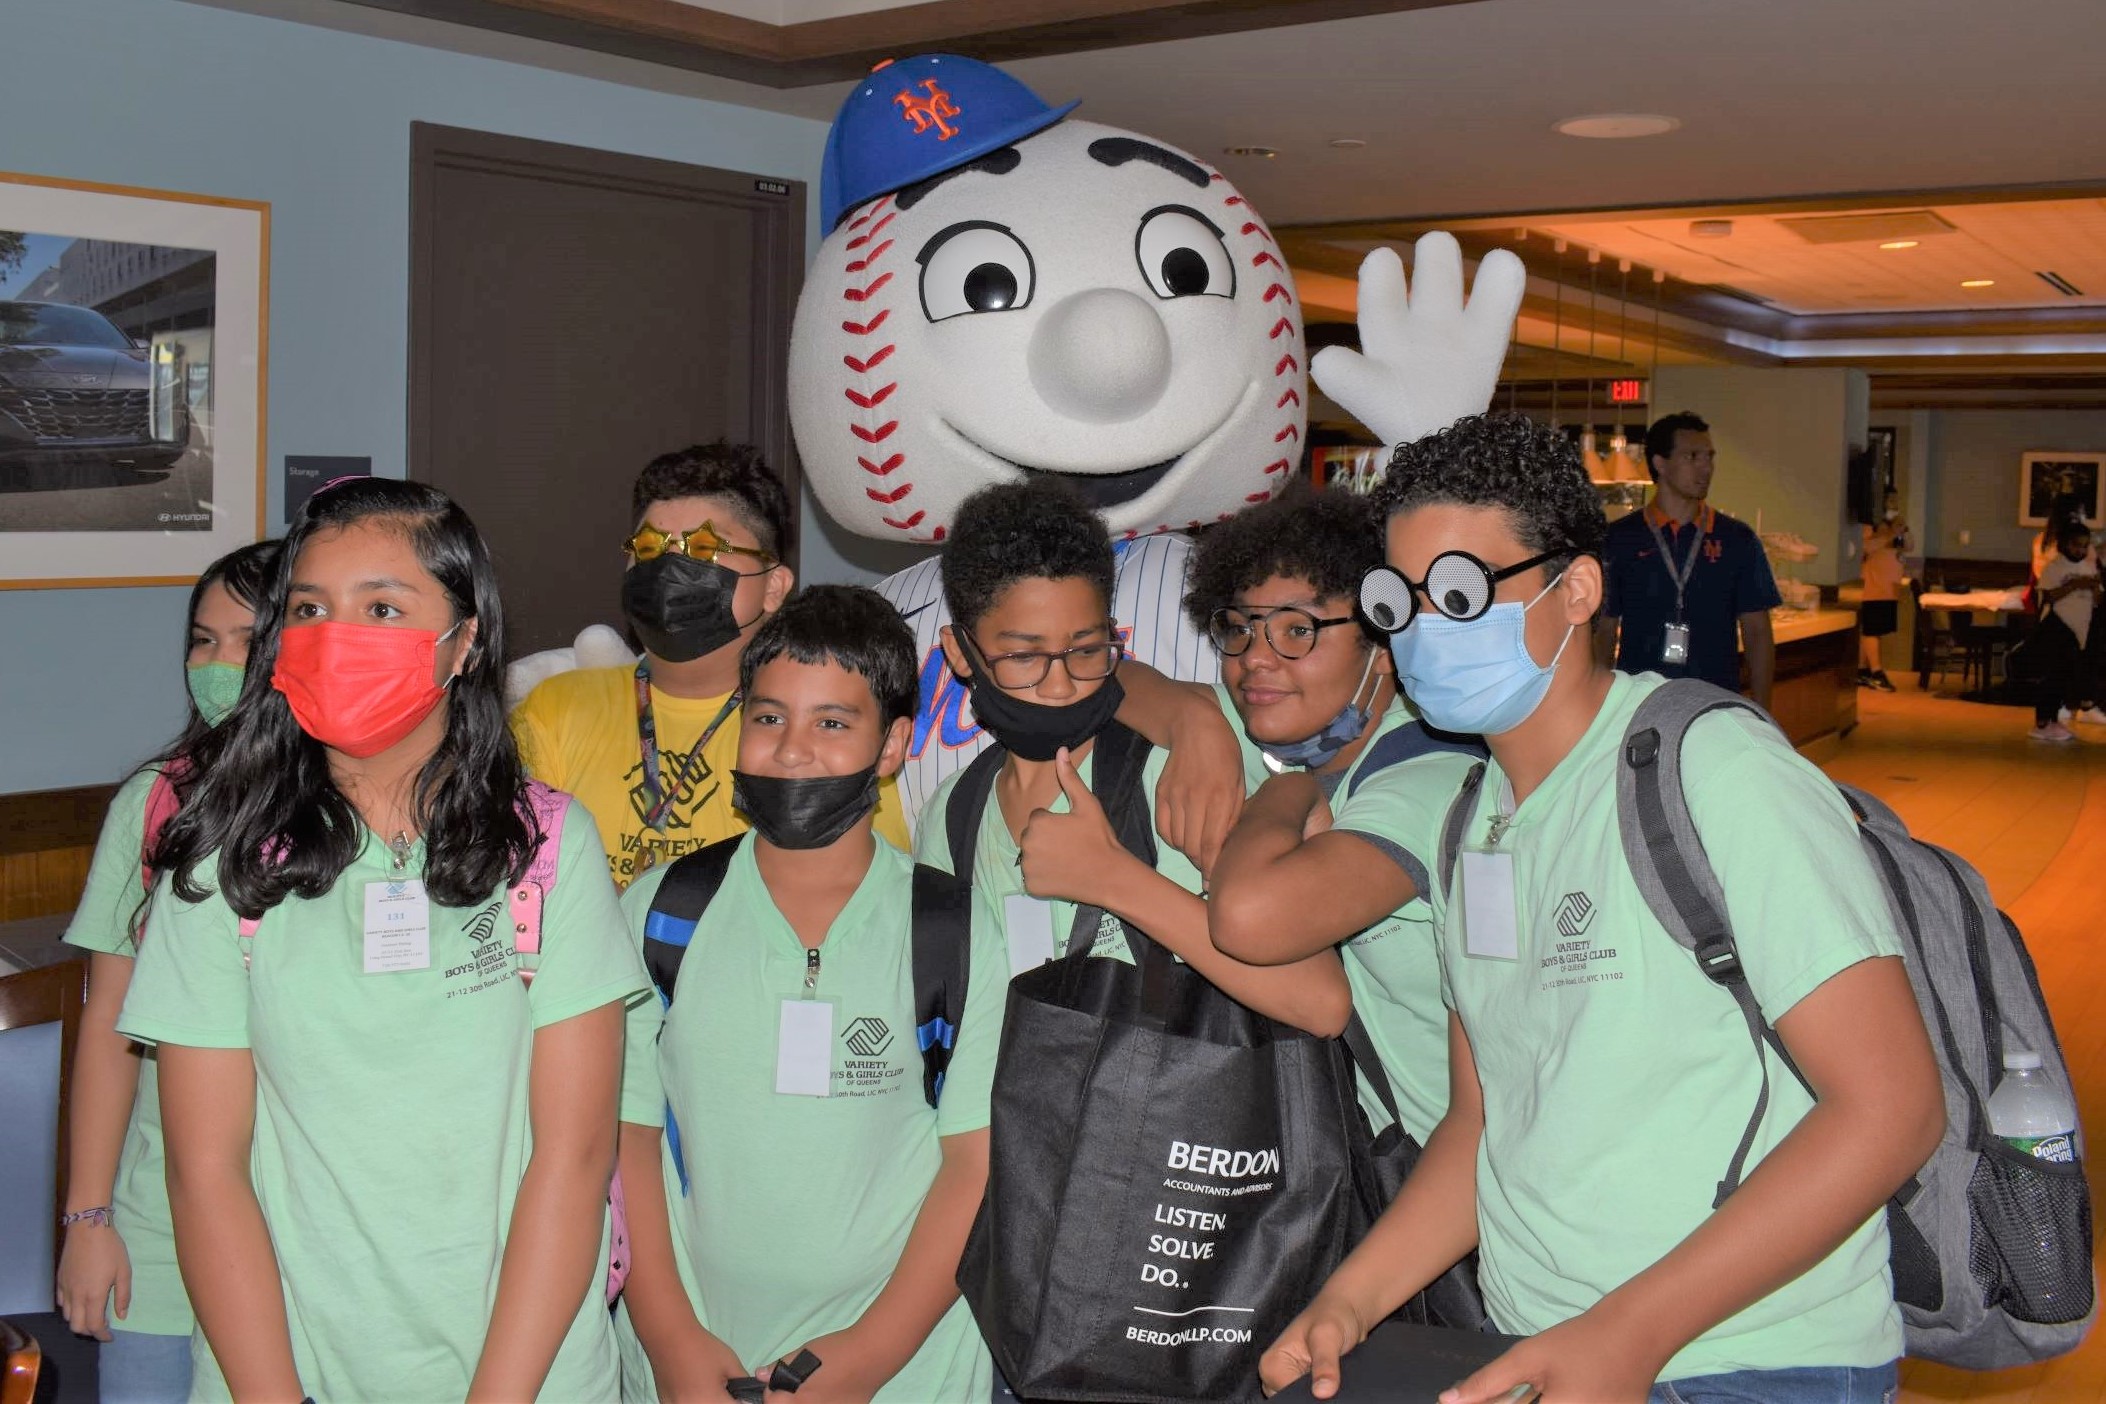 Berdon's program, titled Personal Branding and Career Preparedness, took place on Wednesday, July 21st, at Citi Field and follows a similar format as Math Hits by incorporating gaming and teamwork into the education and learning process. 